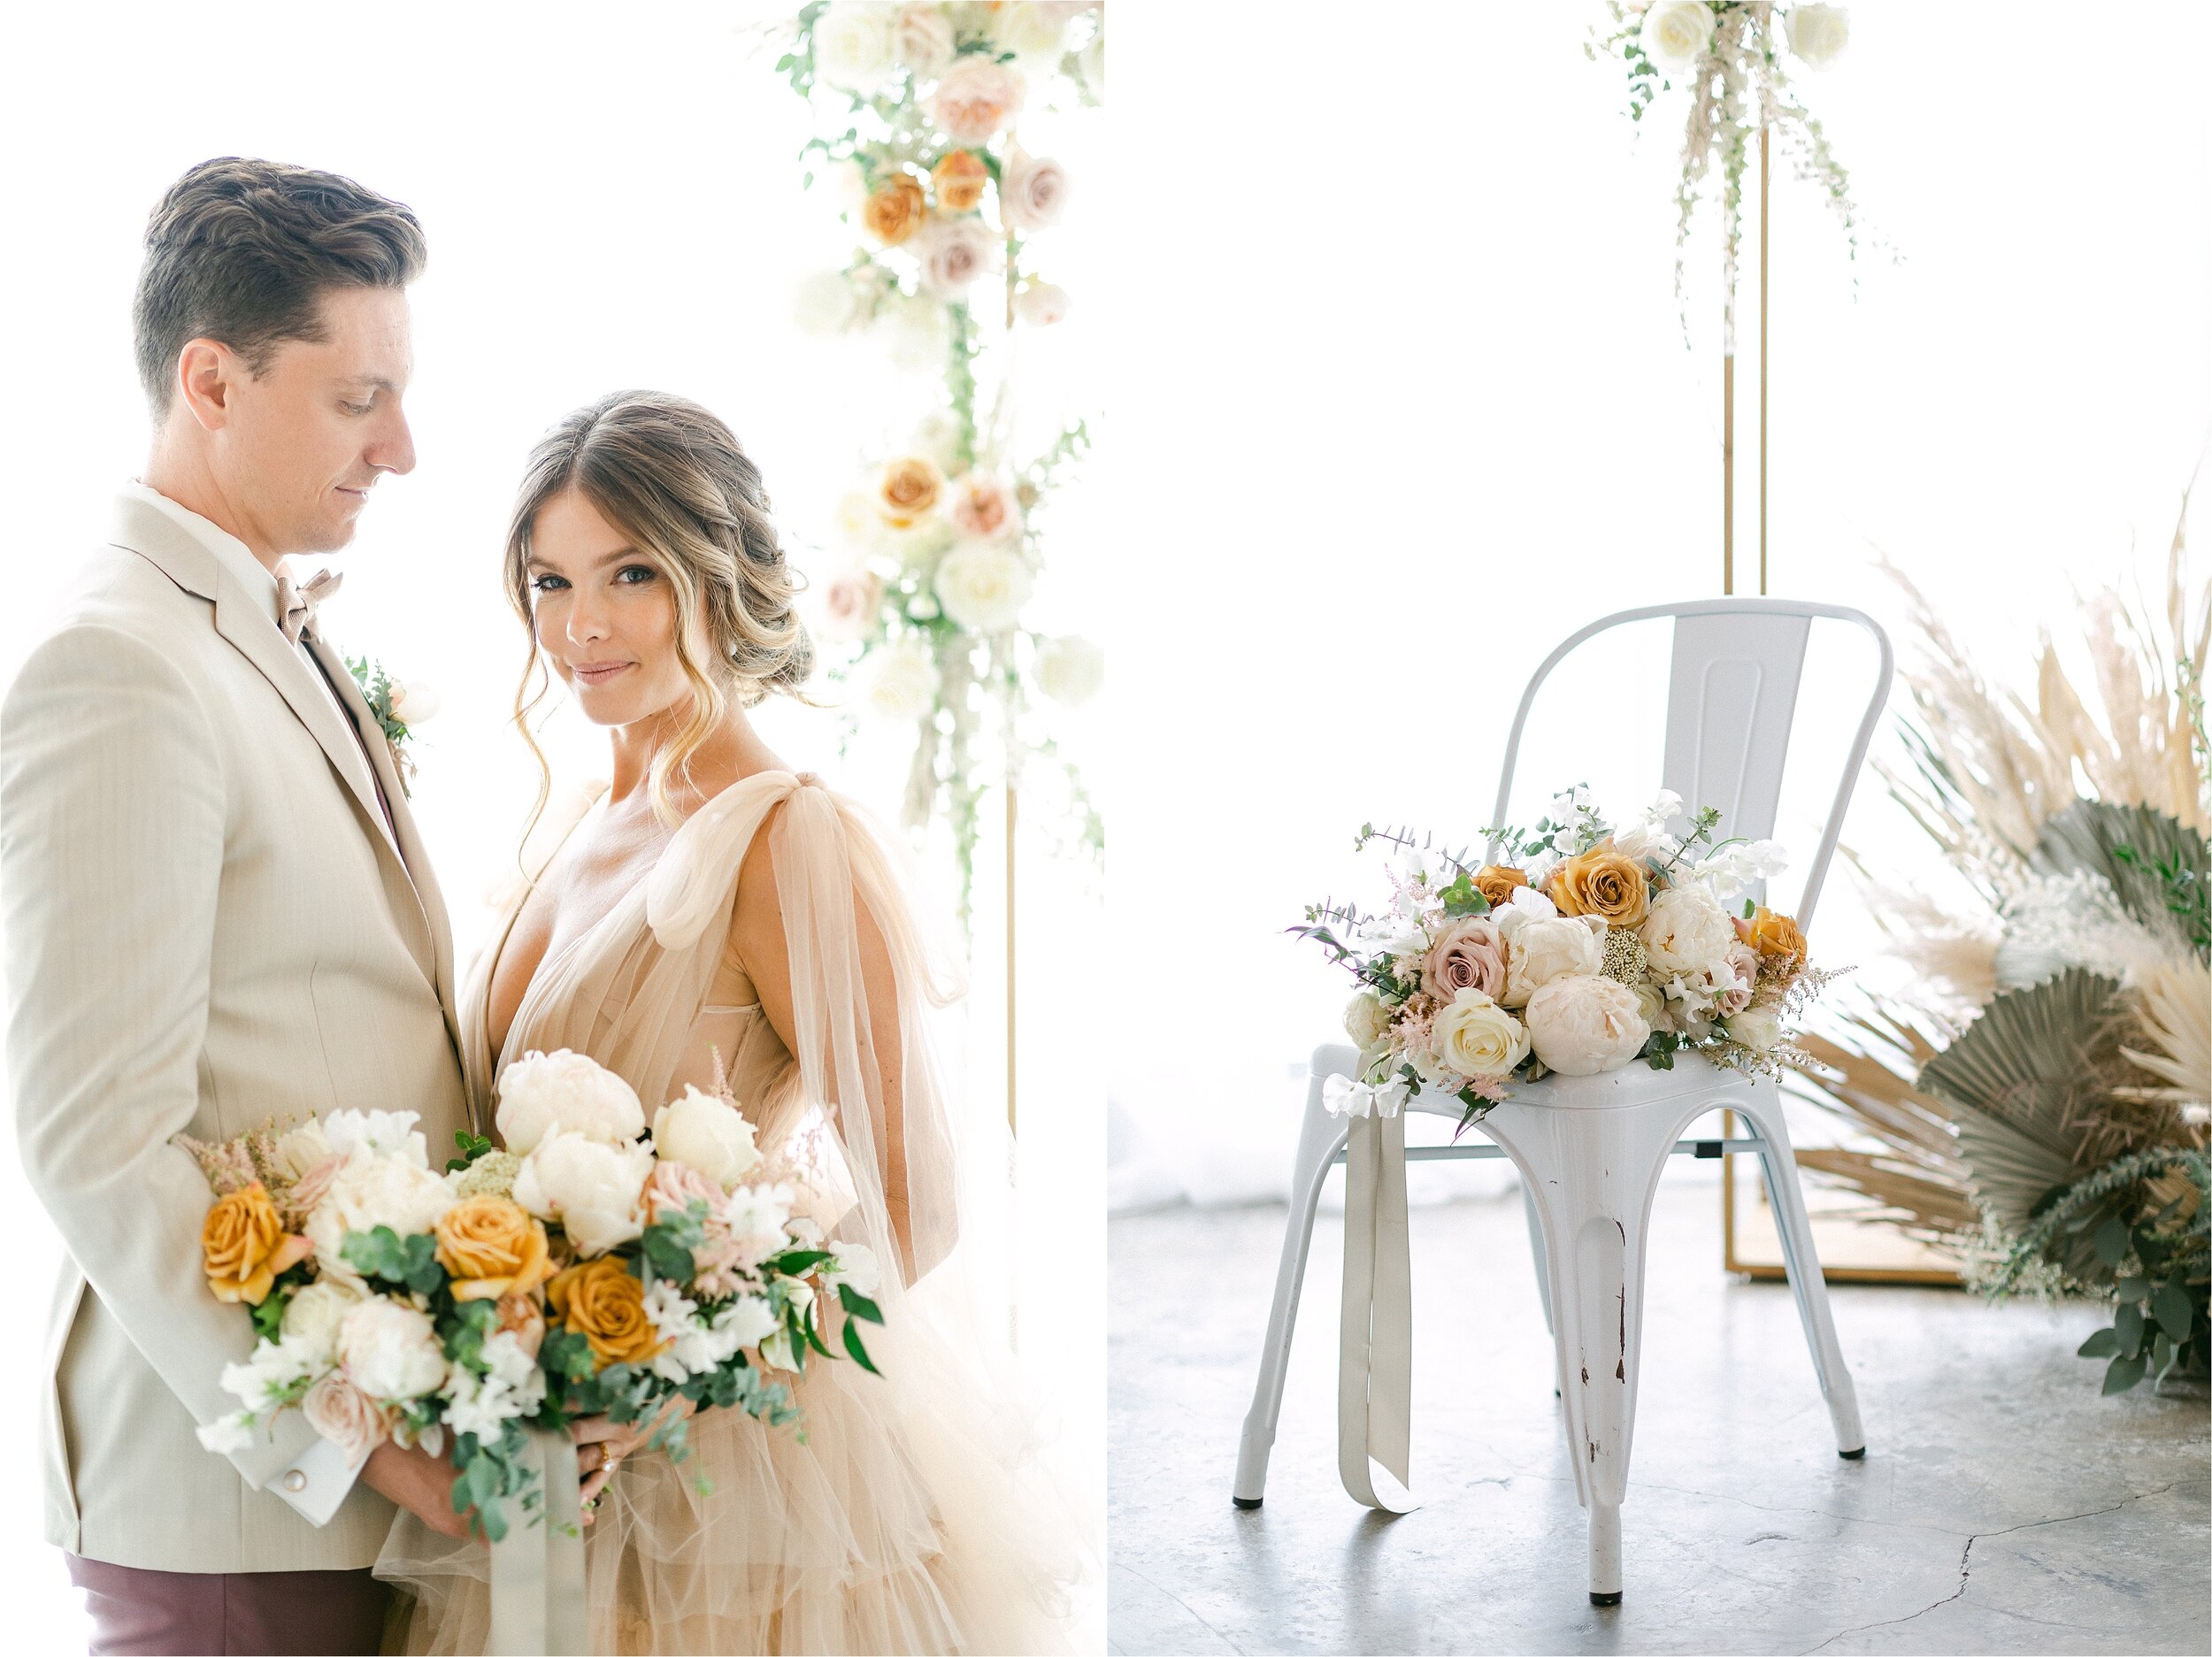 Groom looks at bride as she looks to the camera following their neutral toned micro wedding while holding bouquet